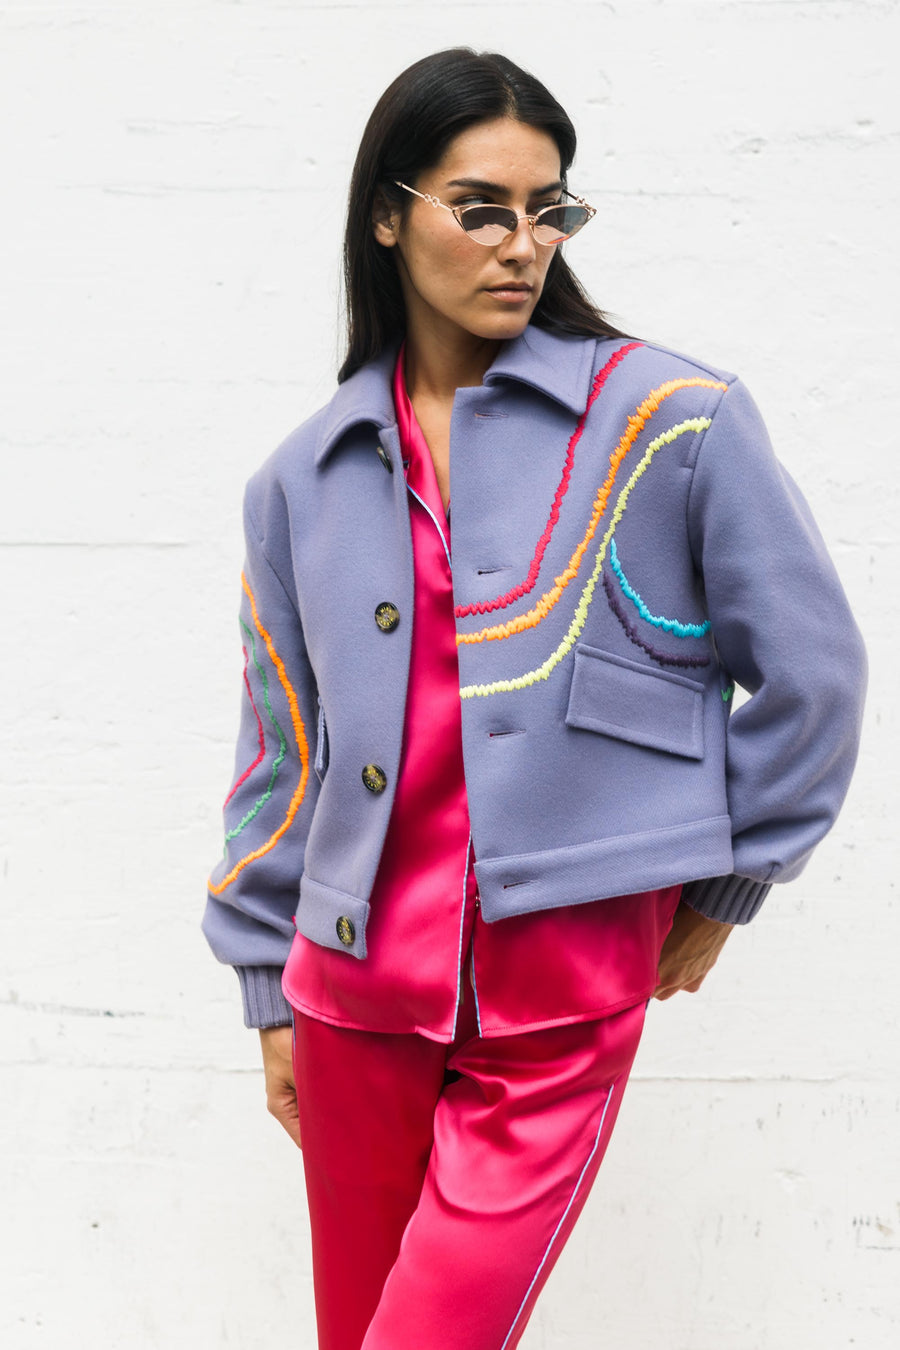 Emroidered Sun Scene Jacket in Lilac